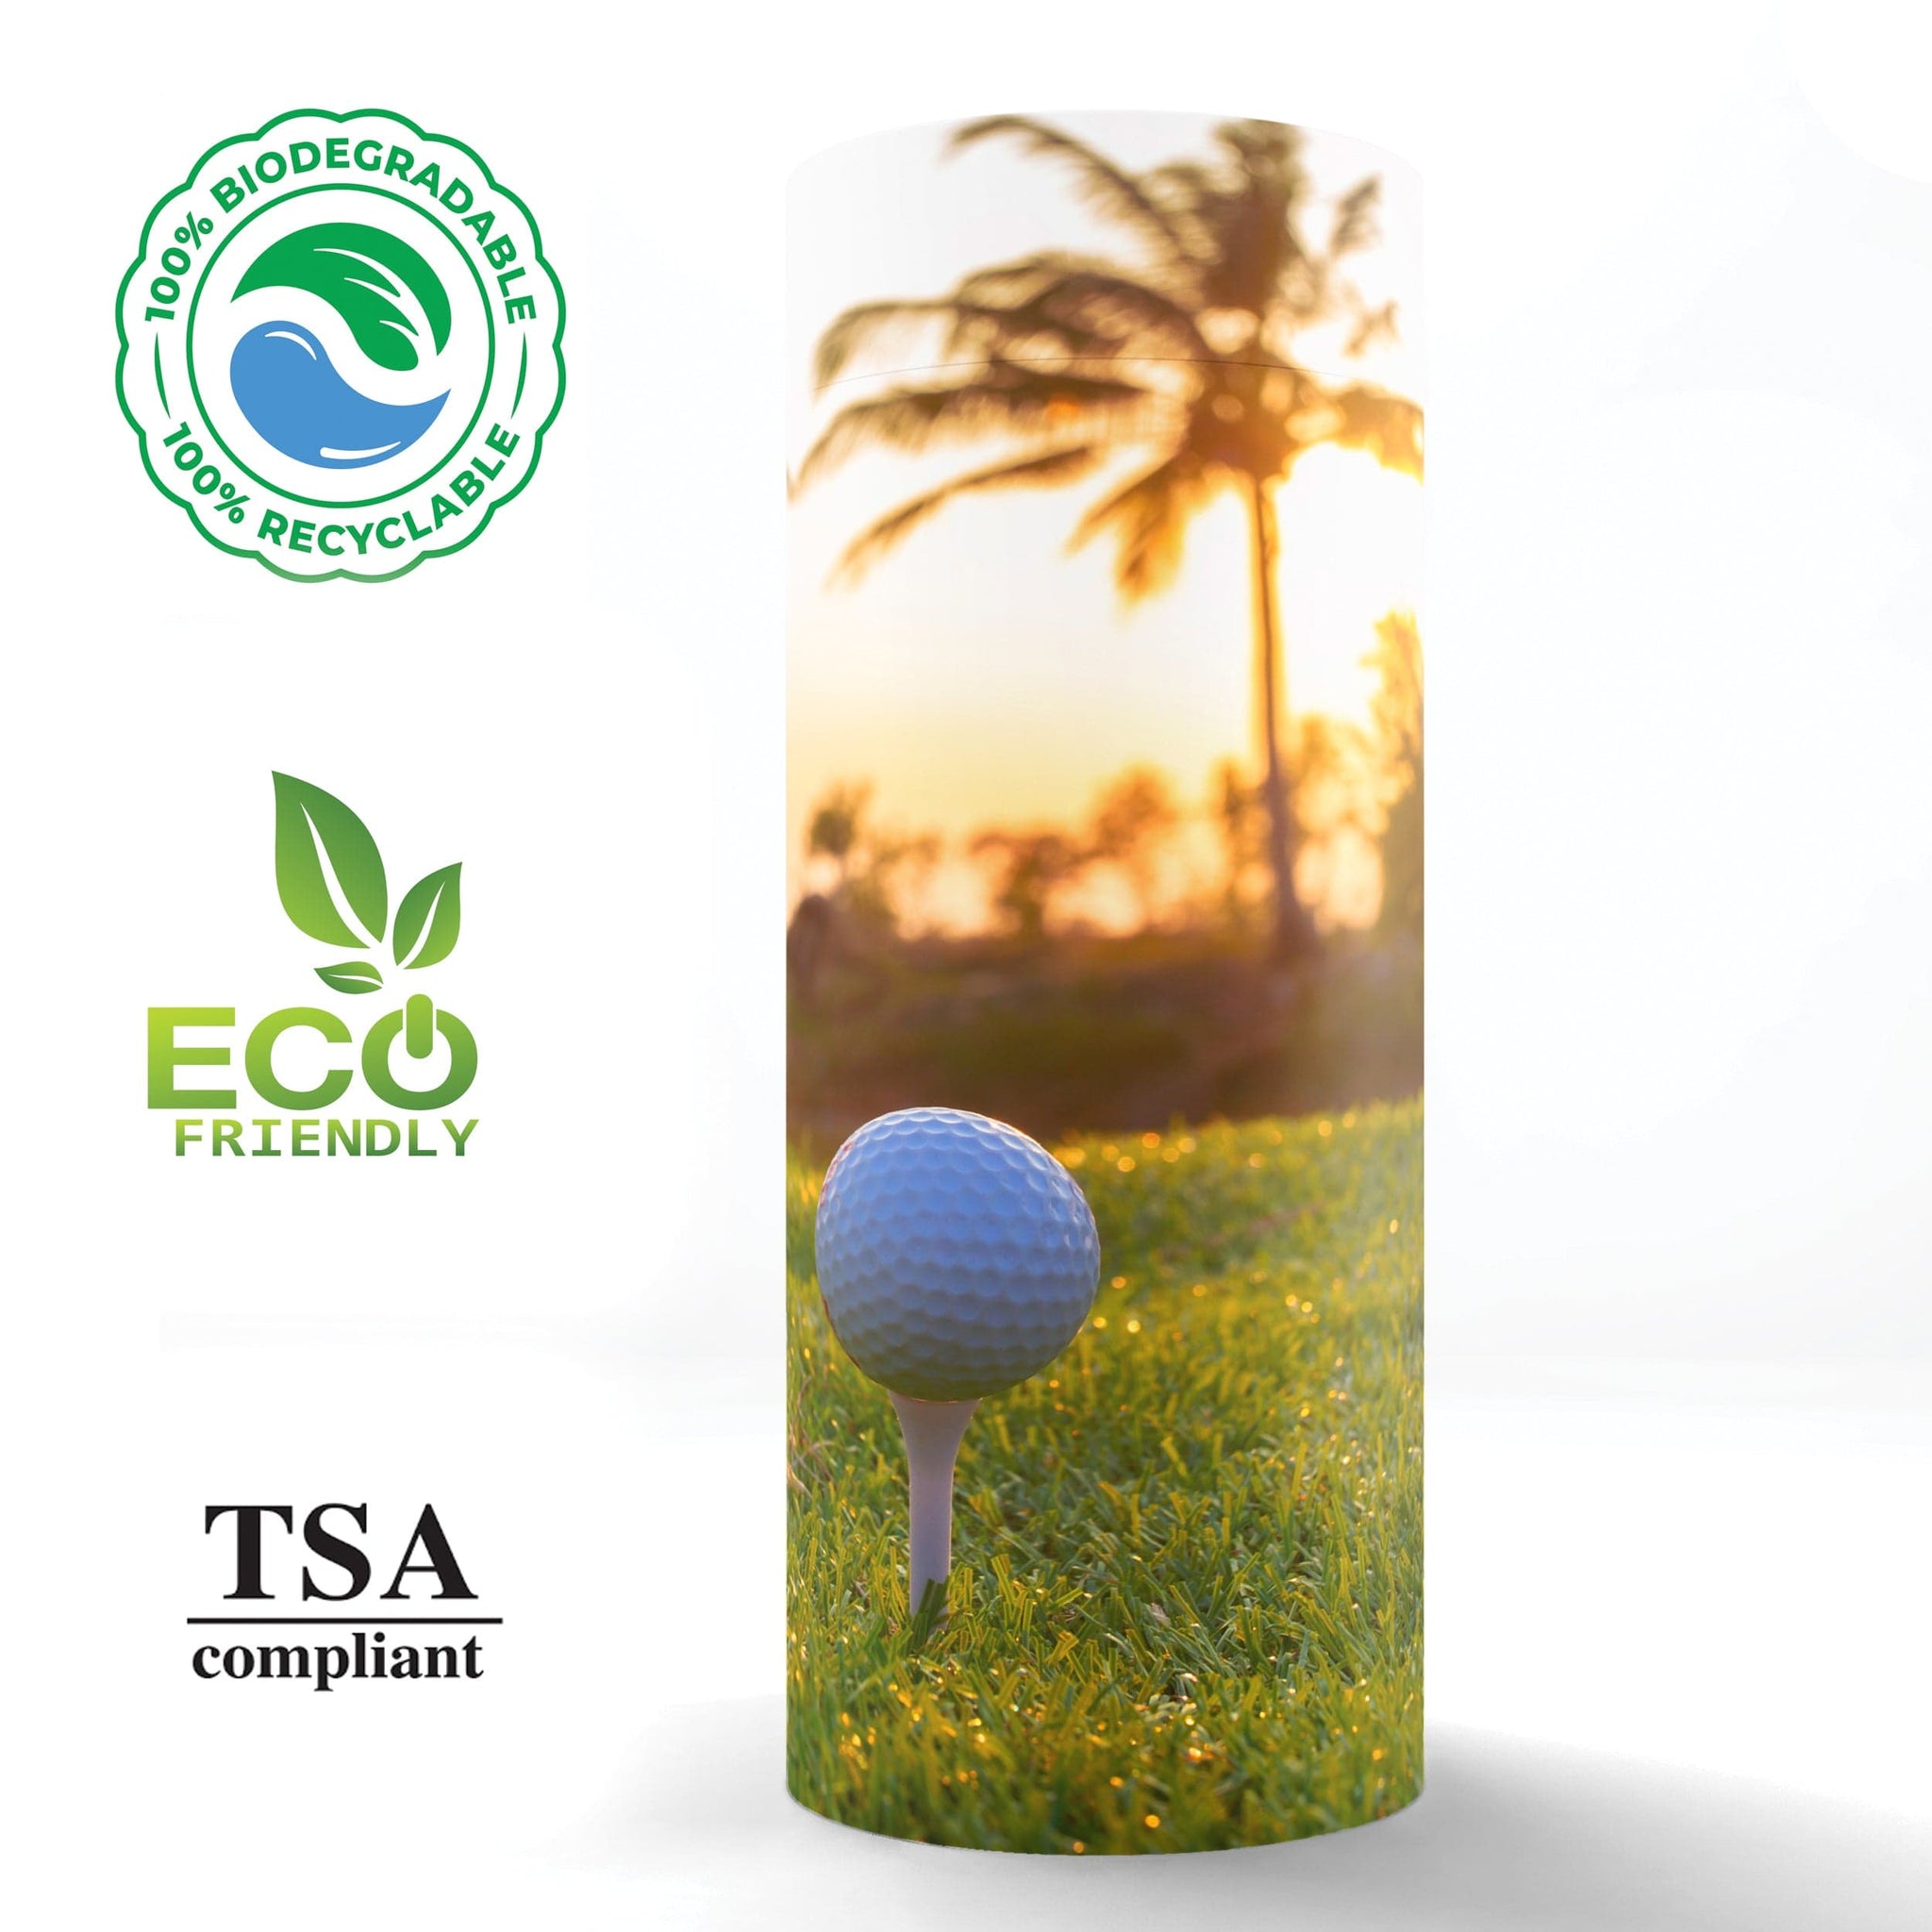 One More Round of Golf Biodegradable & Eco Friendly Burial or Scatteri -  Commemorative Cremation Urns